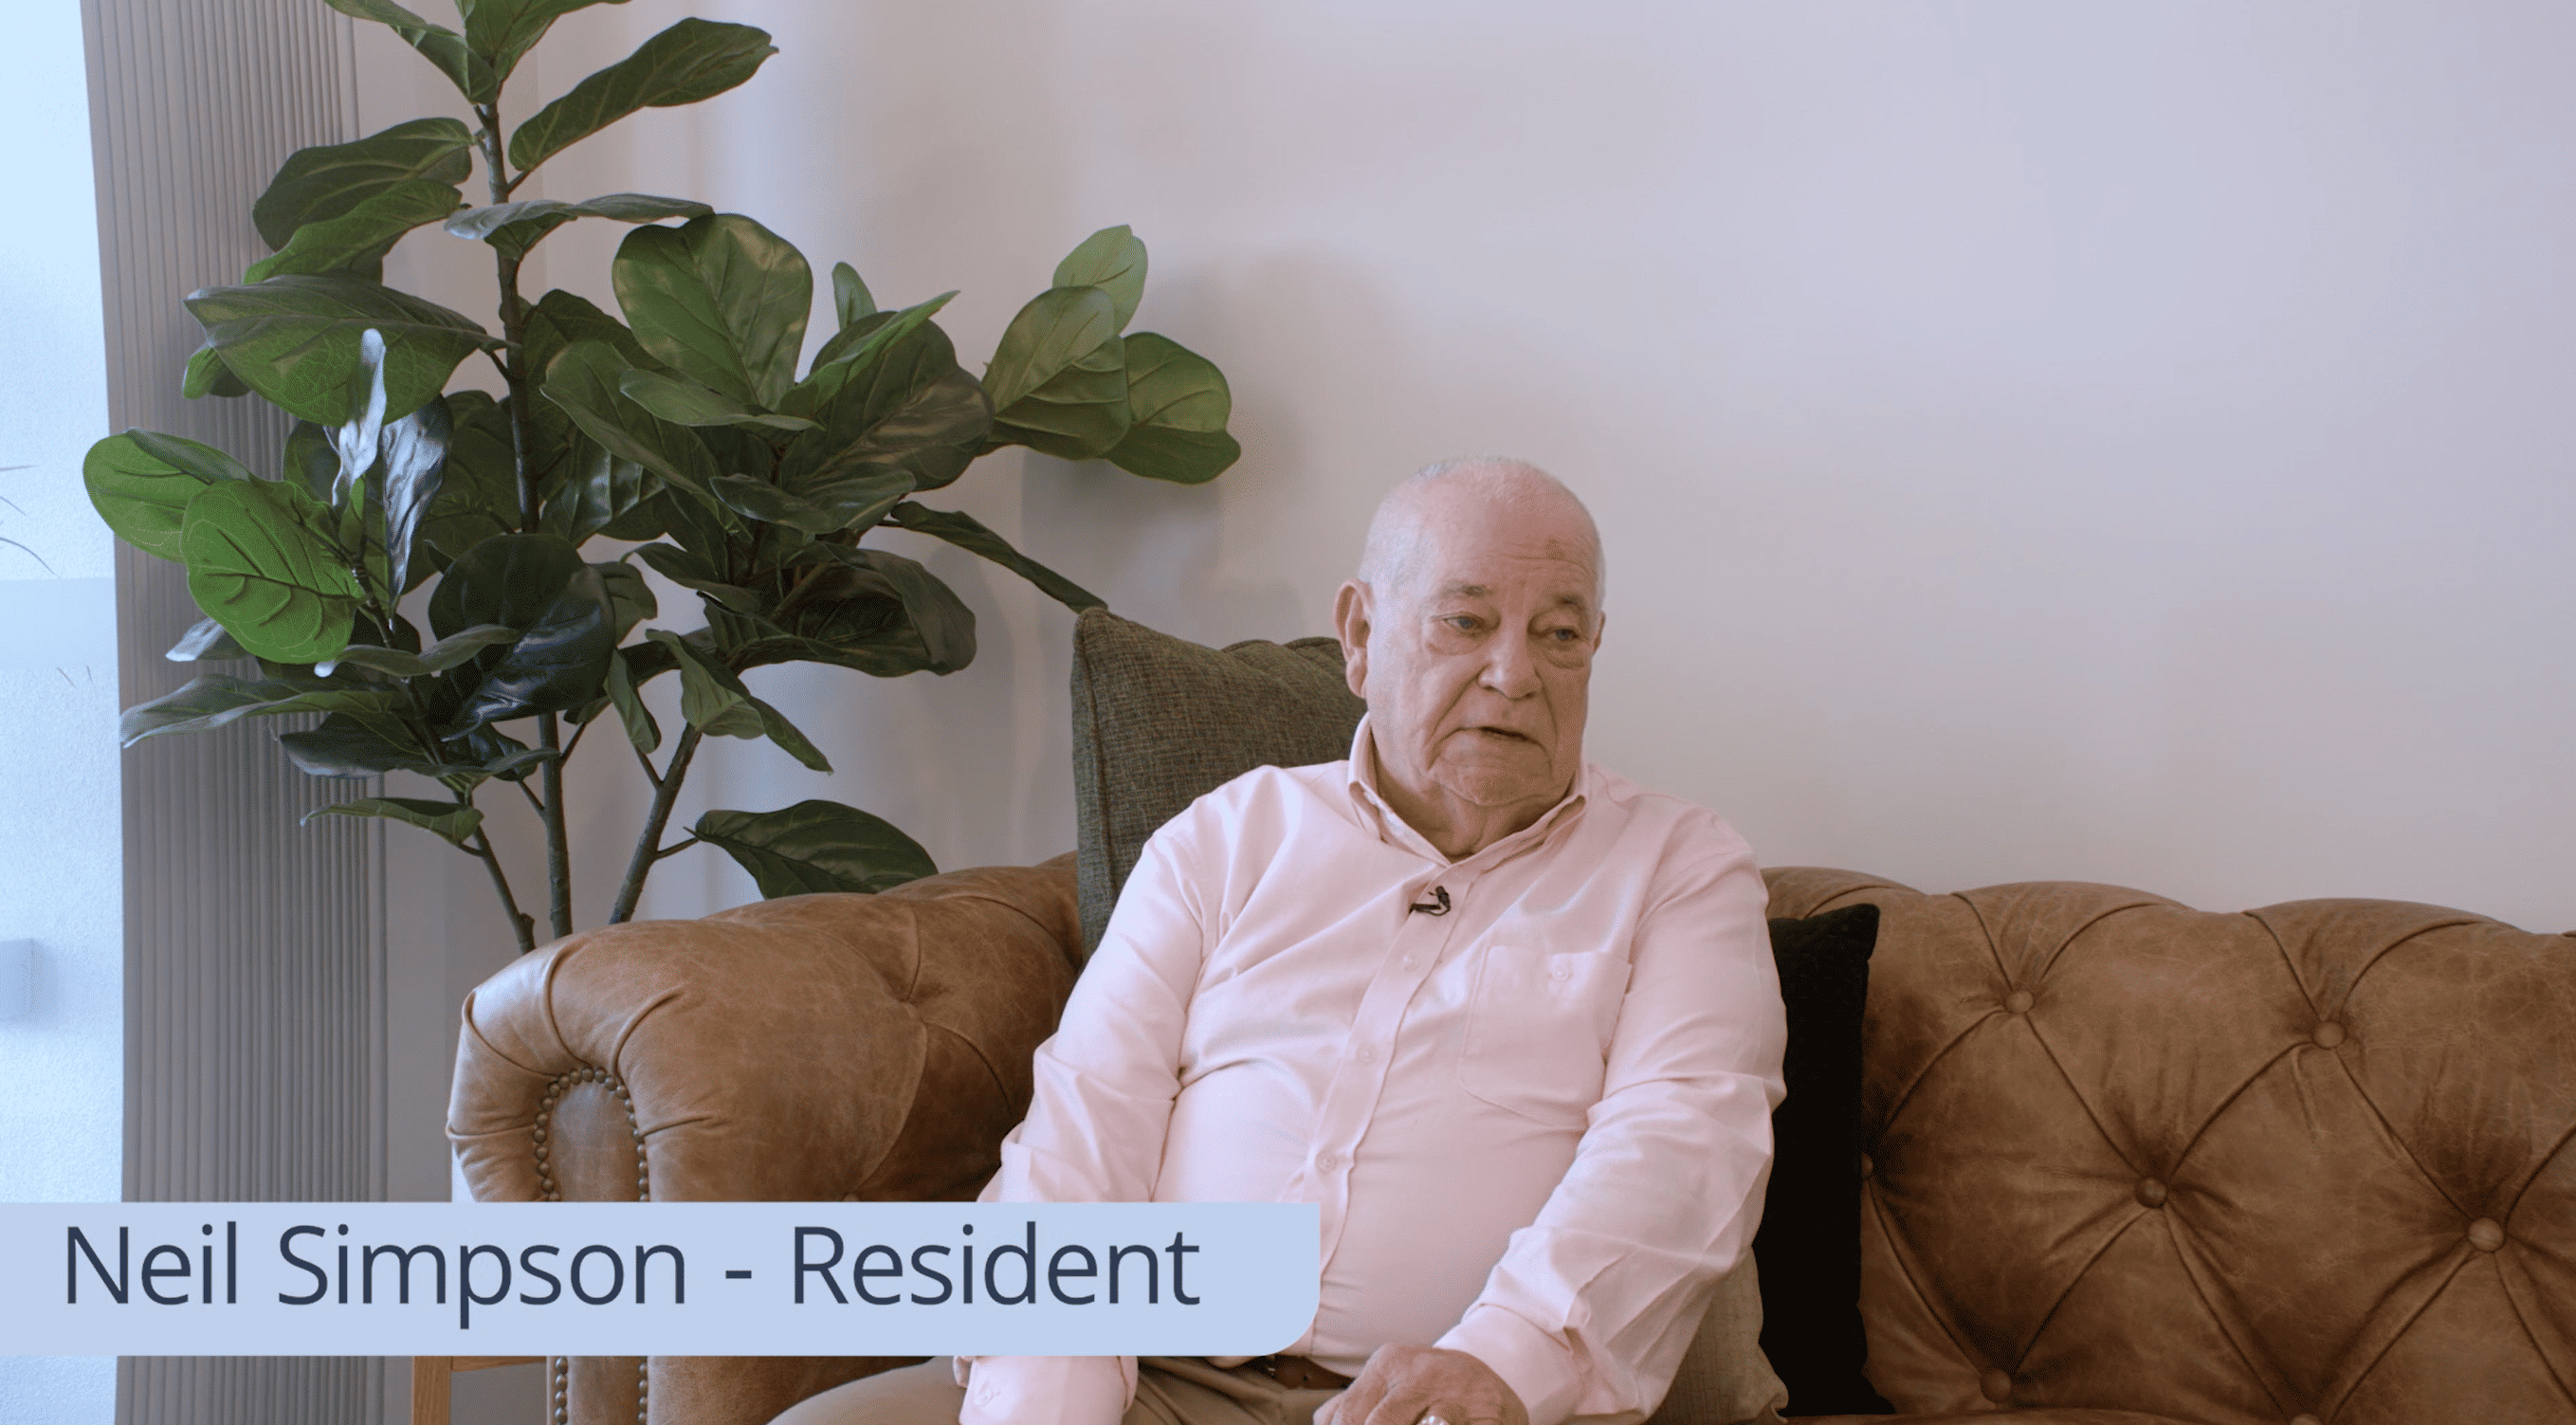 Neil Simpson, a senior male resident sitting on a sofa in his Oak Tree Retirement home.